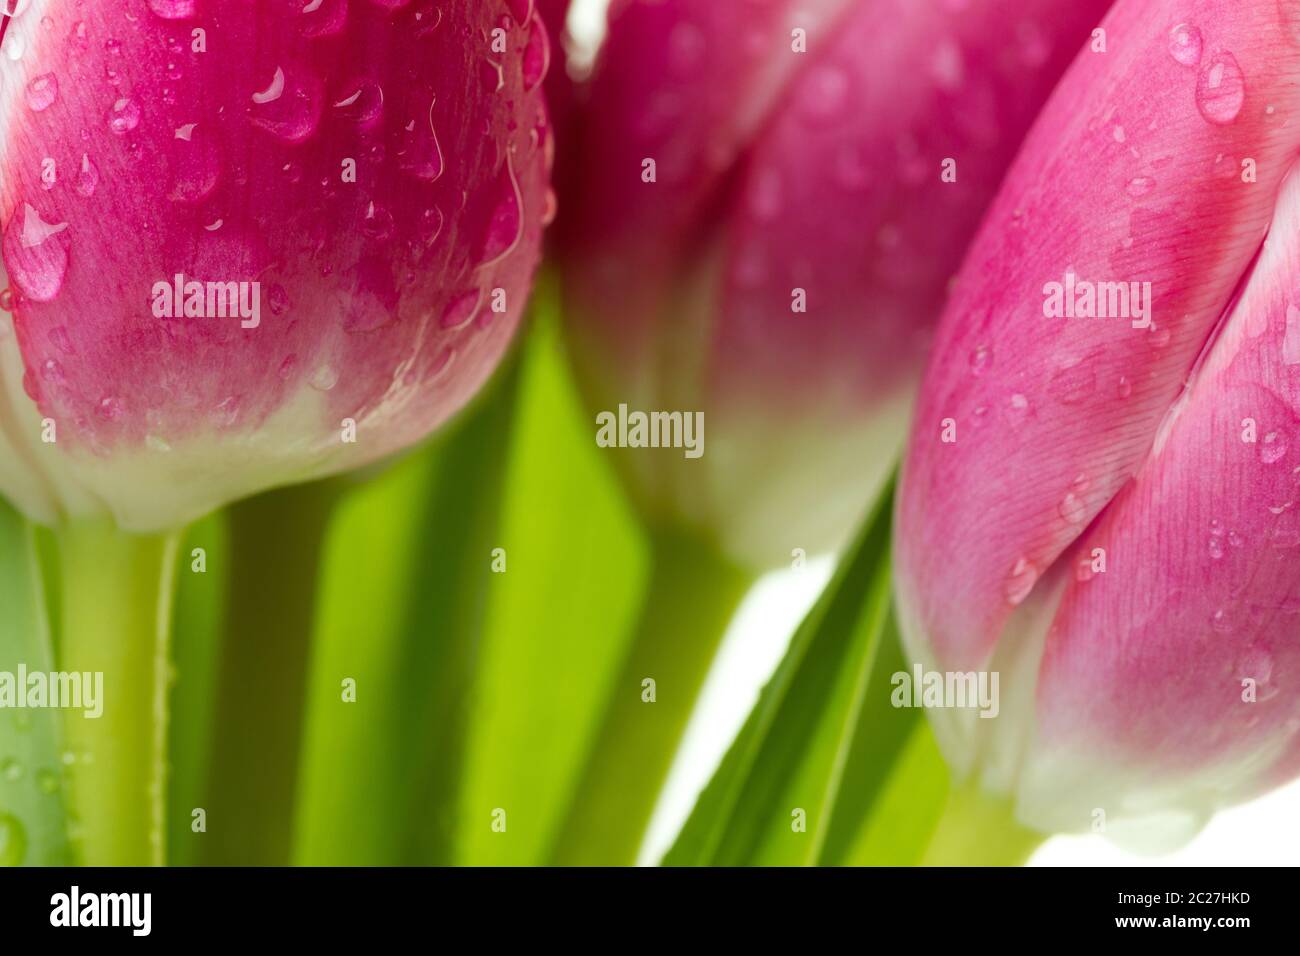 Bunch of pink tulips with water drops isolated on white background. Stock Photo